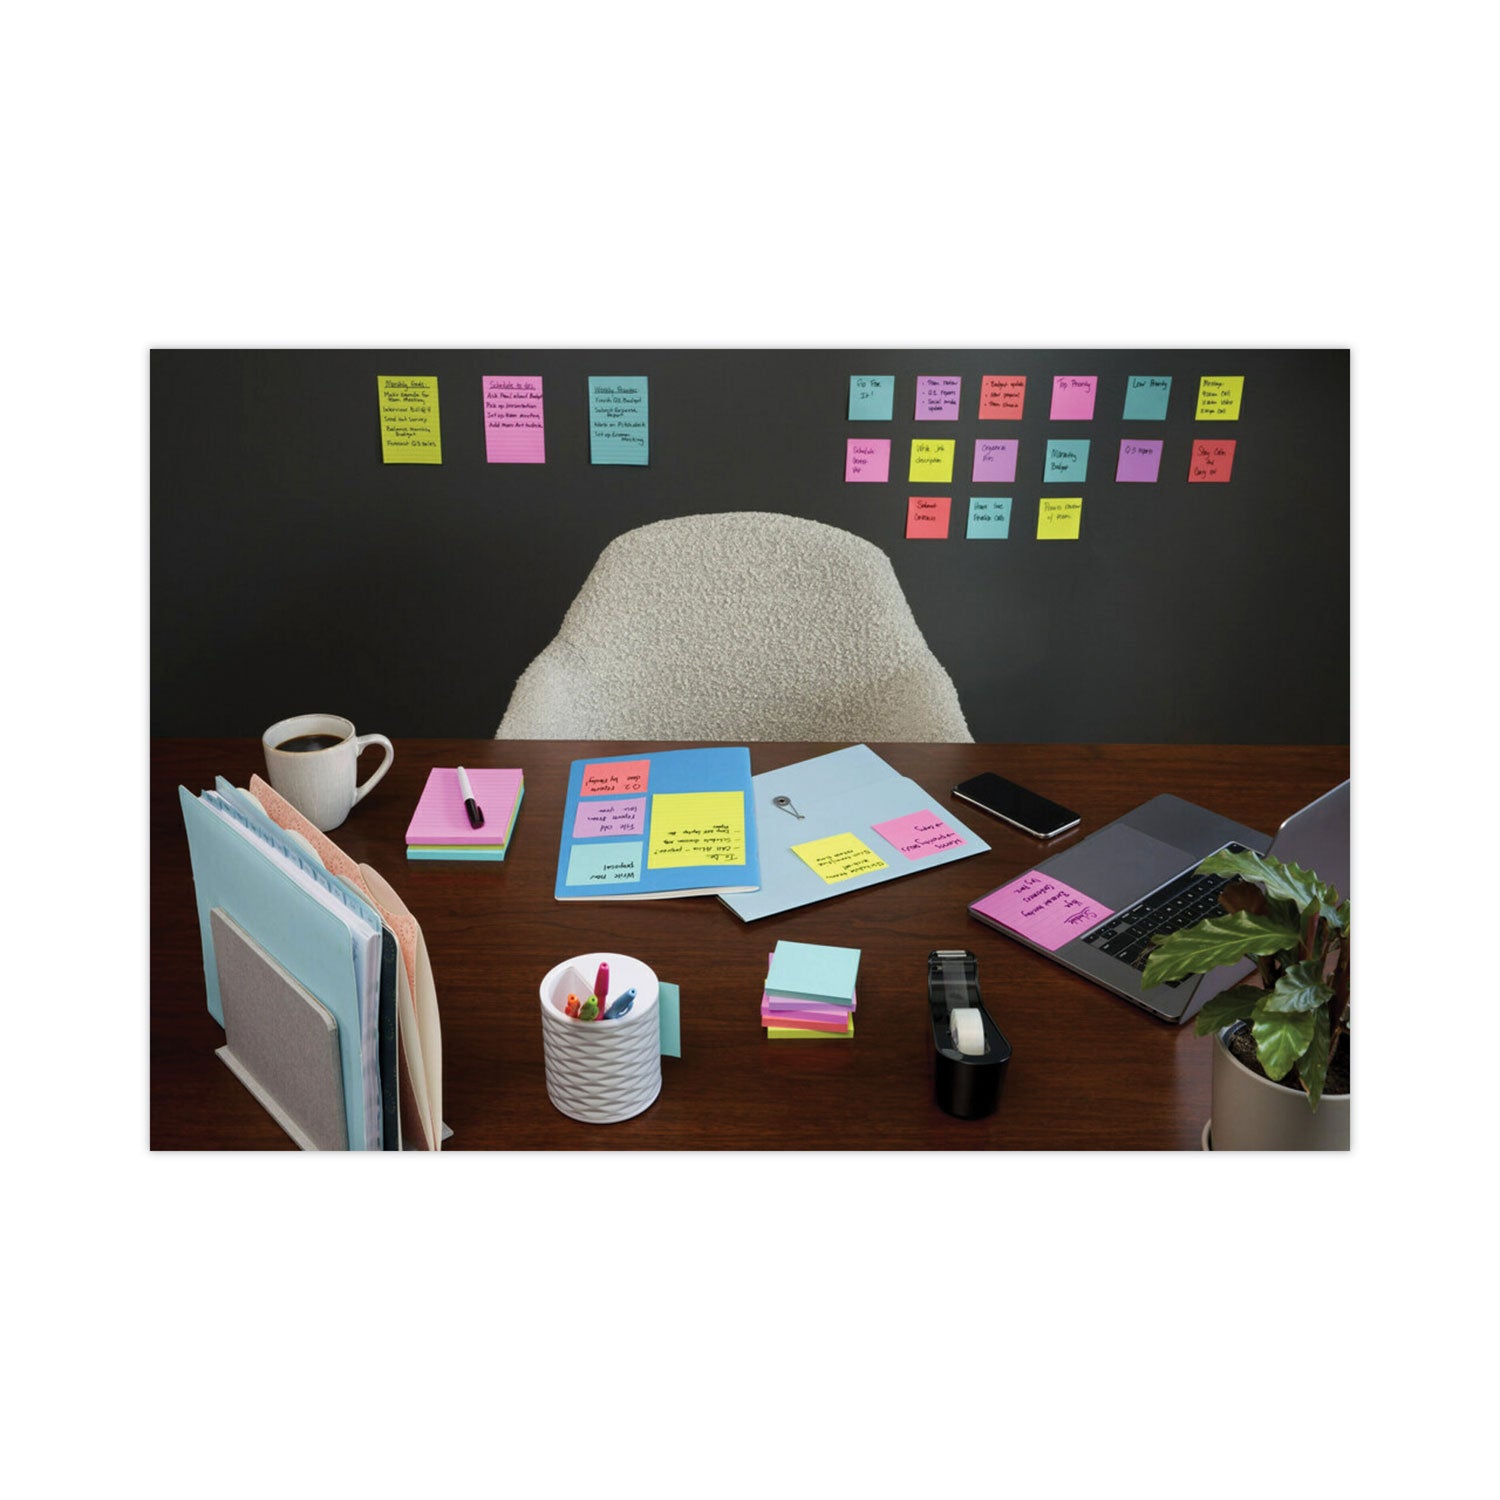 pop-up-3-x-3-note-refill-cabinet-pack-3-x-3-supernova-neons-collection-colors-100-sheets-pad-18-pads-pack_mmmr33018ssmiac - 6